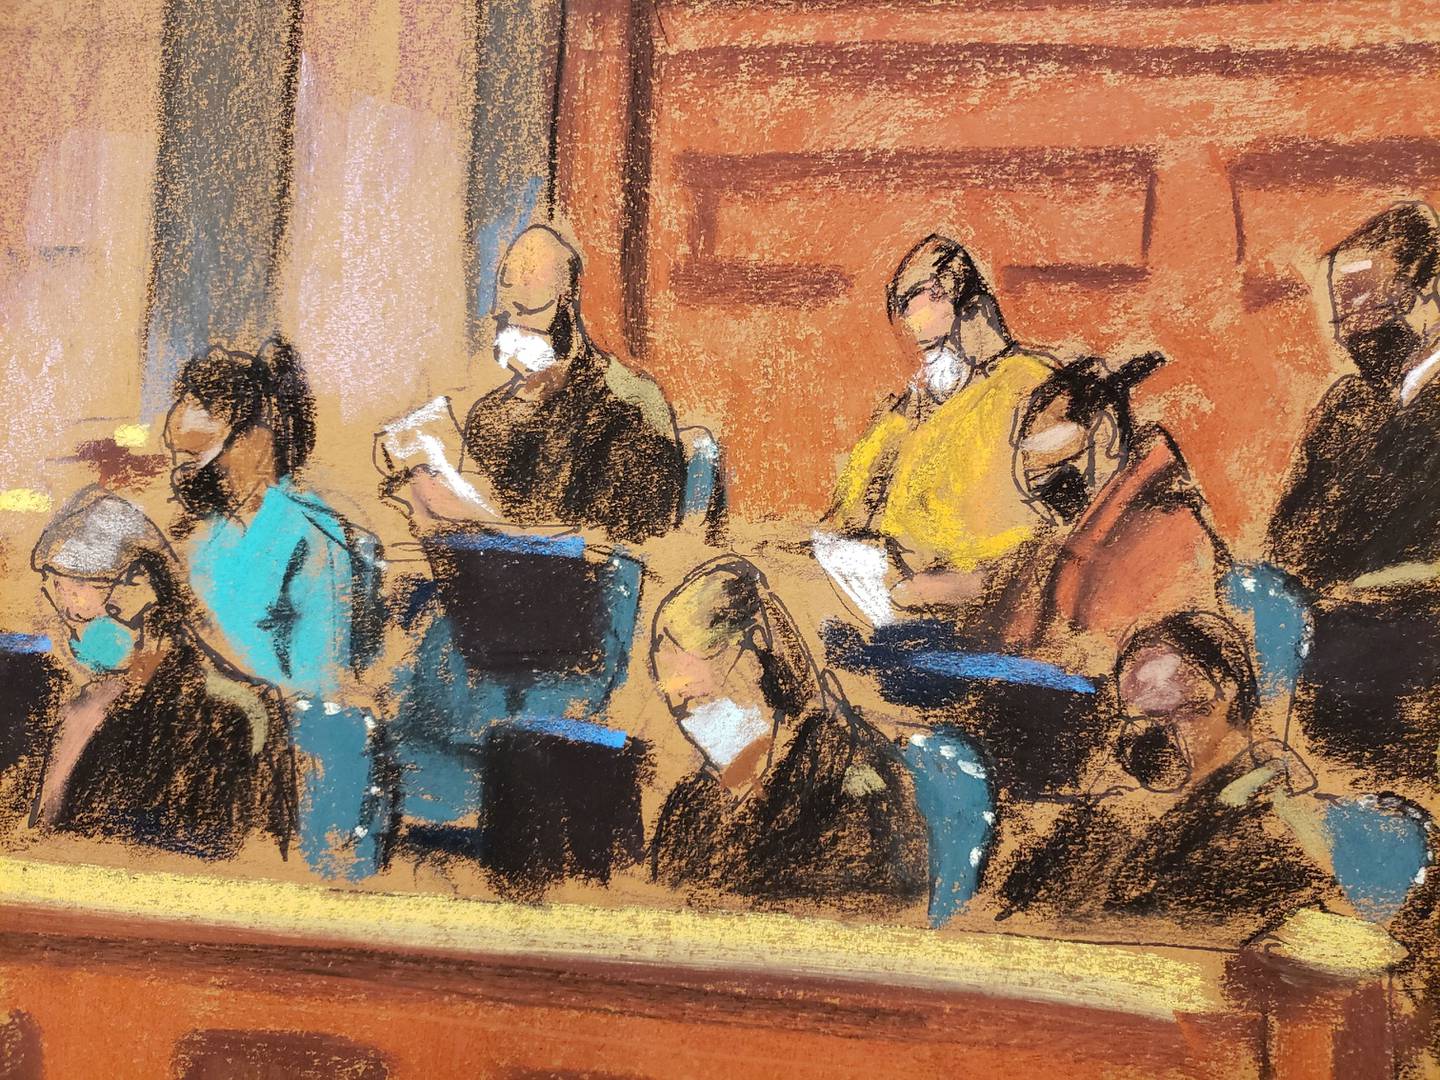 The jury receives their instructions before beginning deliberations during the trial of Ghislaine Maxwell, the Jeffrey Epstein associate accused of sex trafficking, in a courtroom sketch in New York City. Reuters